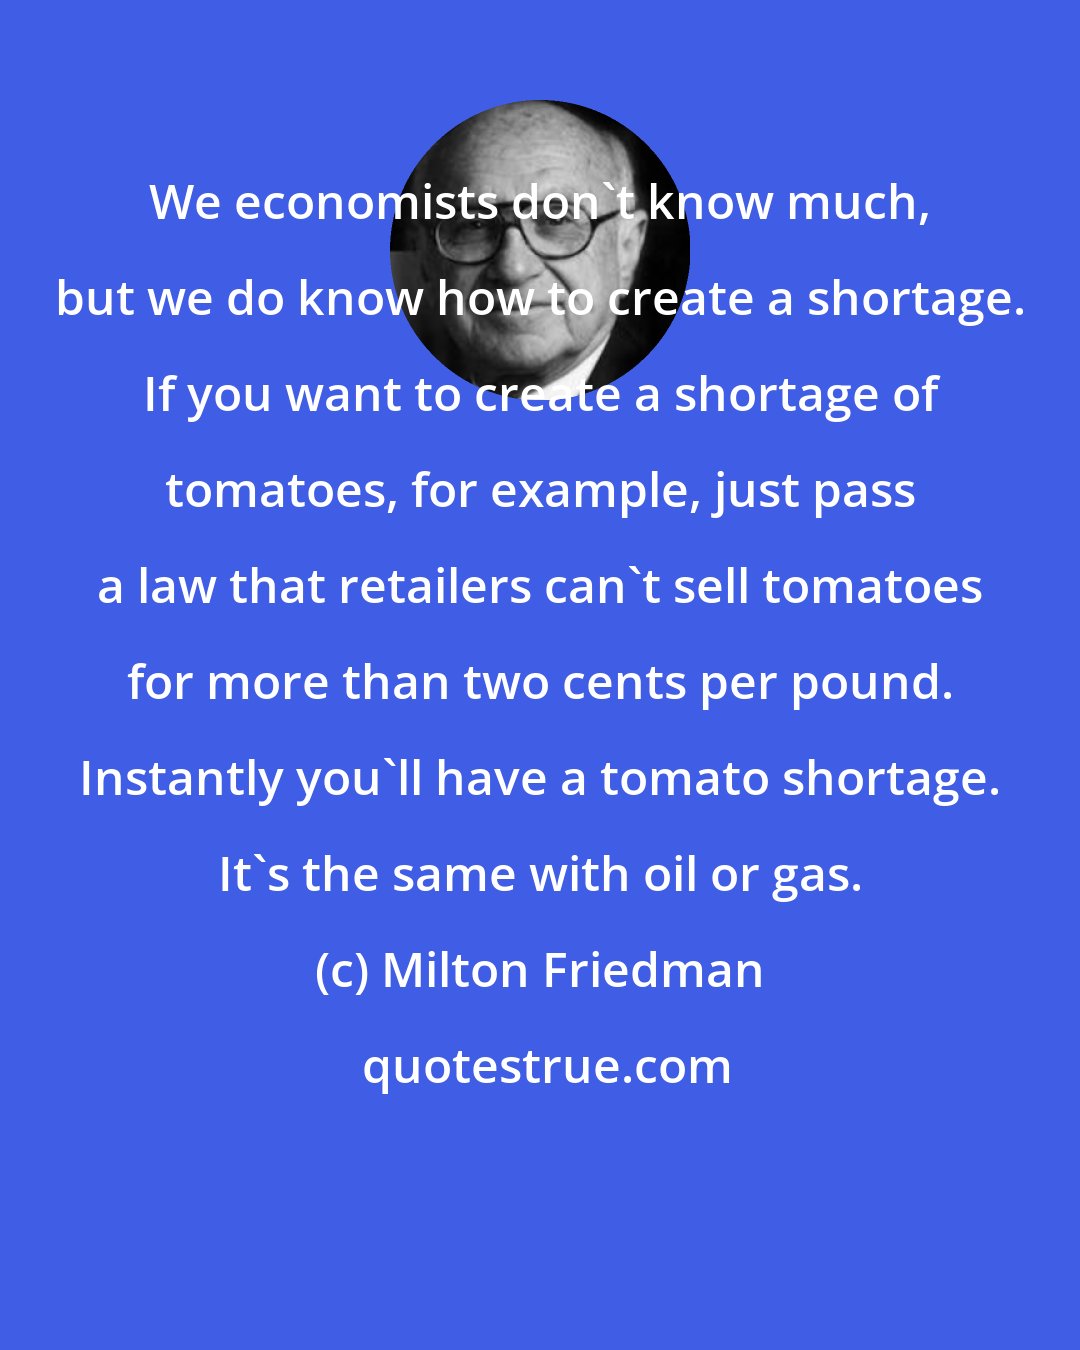 Milton Friedman: We economists don't know much, but we do know how to create a shortage. If you want to create a shortage of tomatoes, for example, just pass a law that retailers can't sell tomatoes for more than two cents per pound. Instantly you'll have a tomato shortage. It's the same with oil or gas.